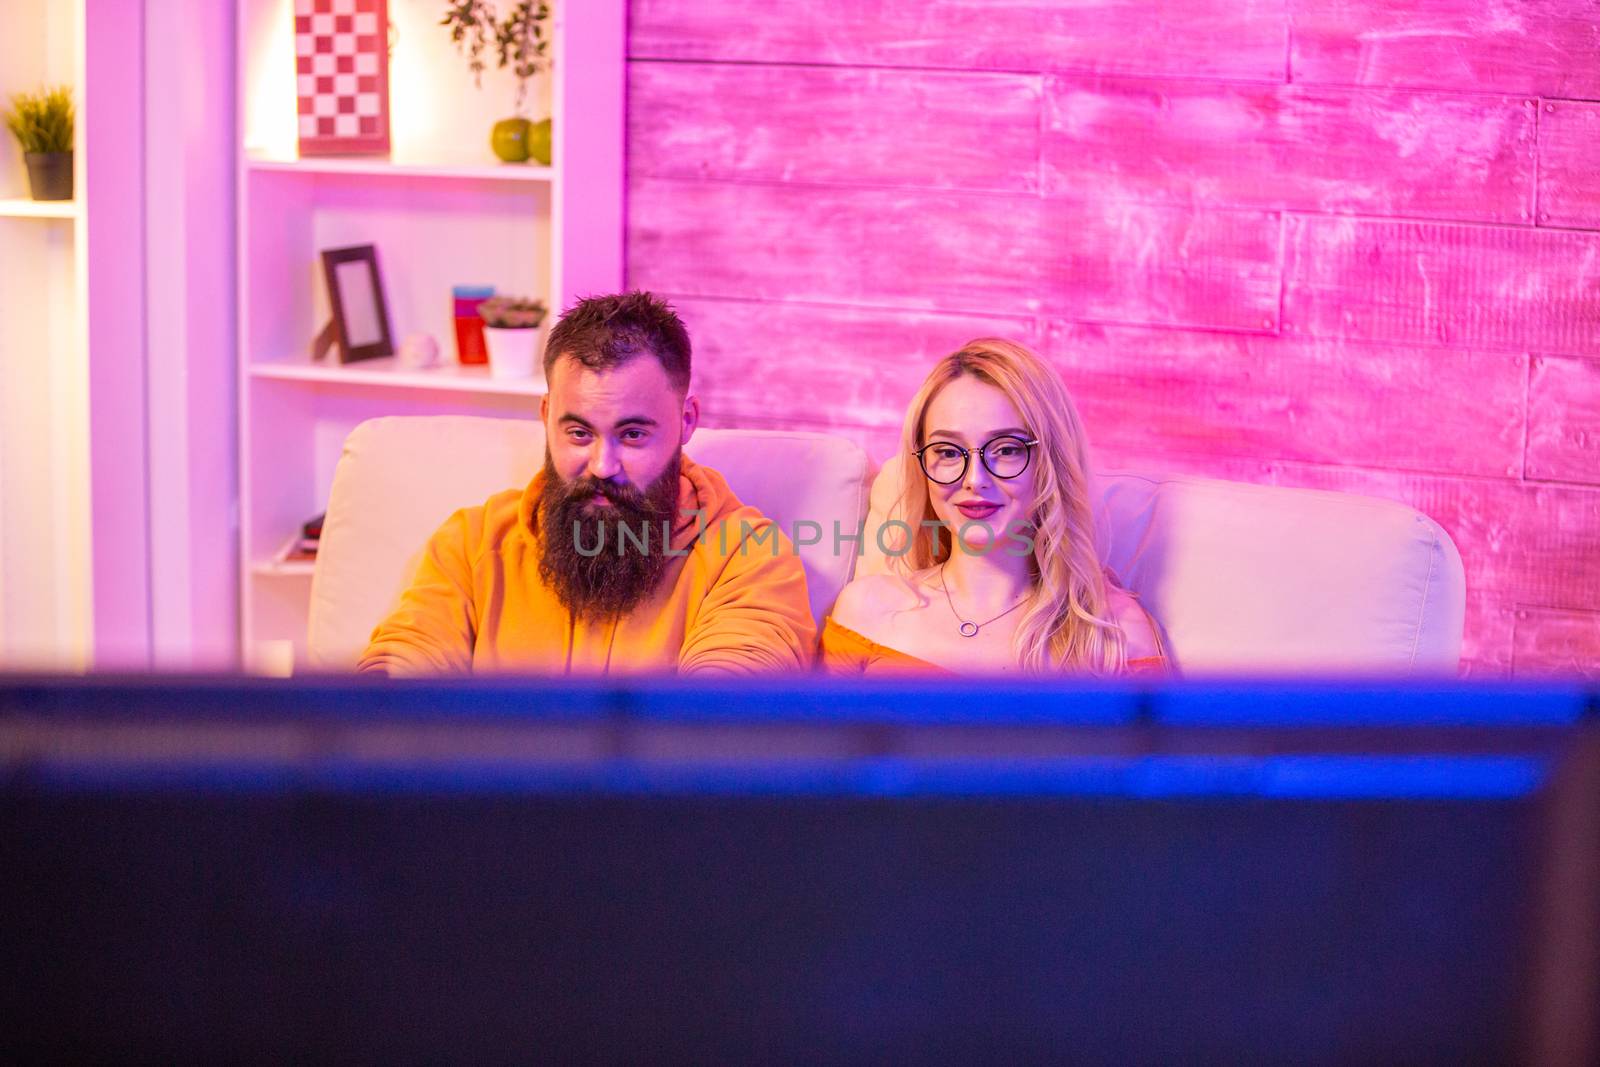 Beautiful blonde girl smiling while playing video games with her boyfriend using wireless controllers on a big screen TV